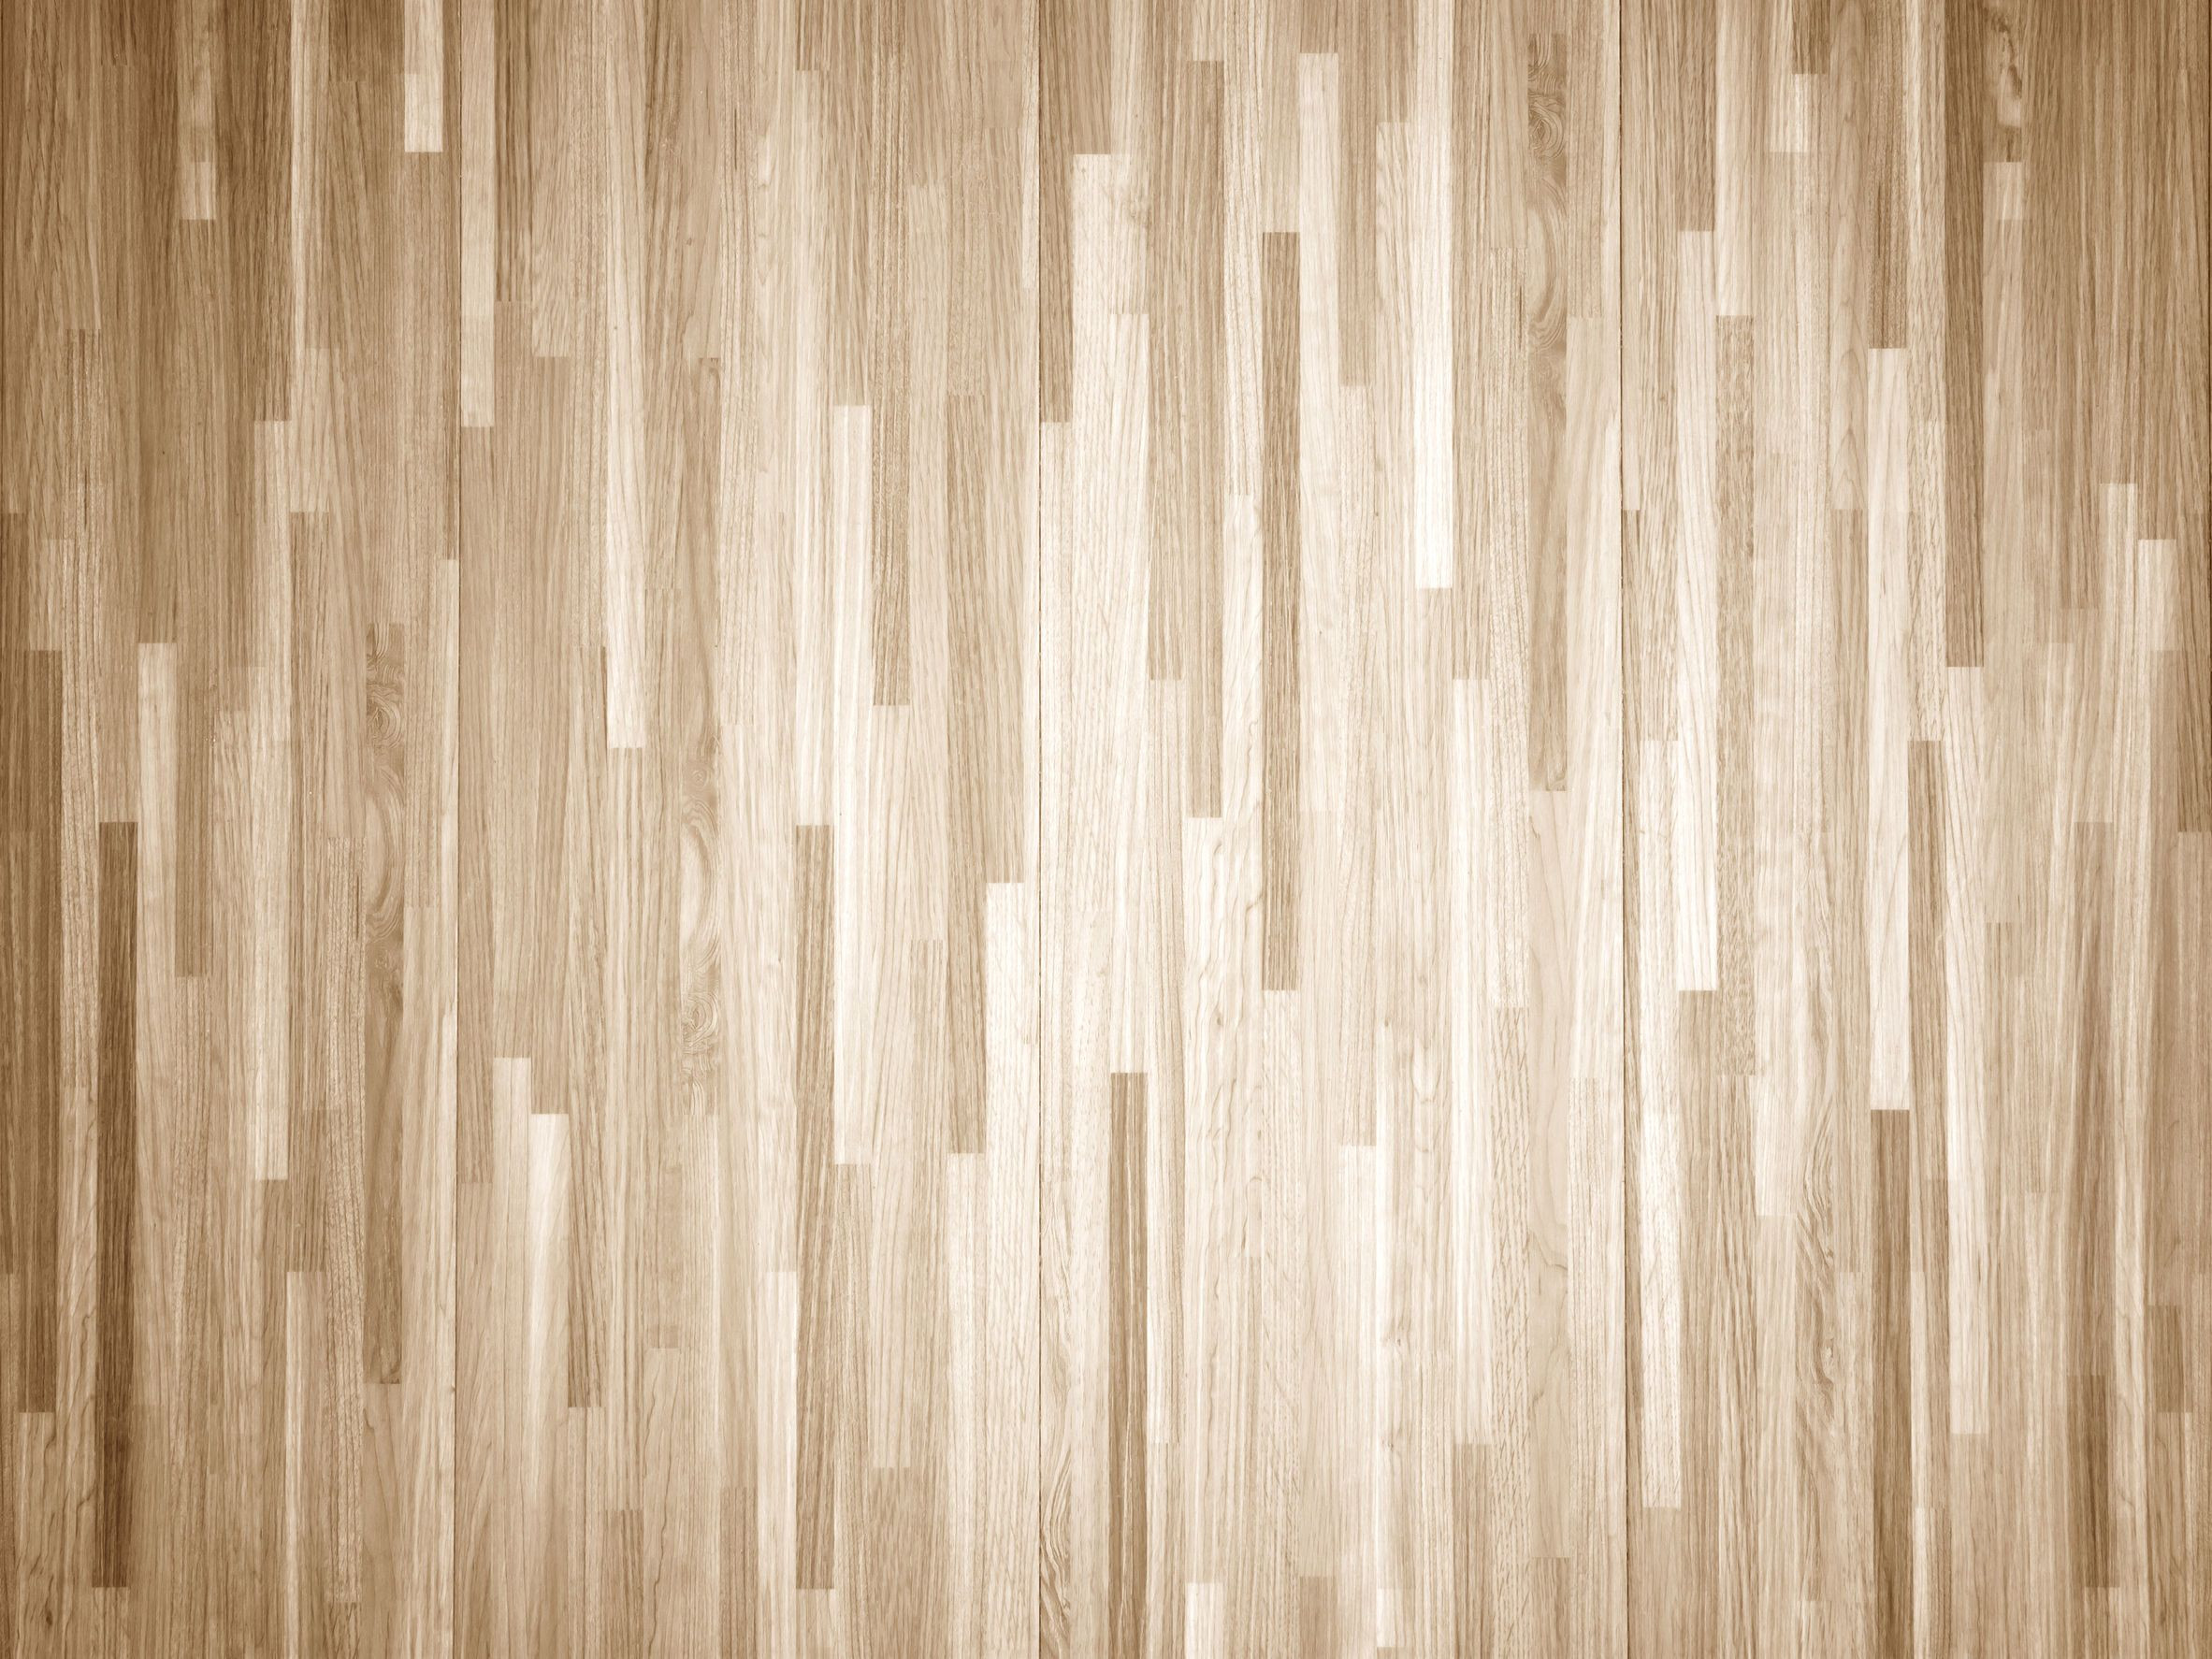 10 Unique Hardwood Flooring Types Pros and Cons 2024 free download hardwood flooring types pros and cons of how to chemically strip wood floors woodfloordoctor com in you